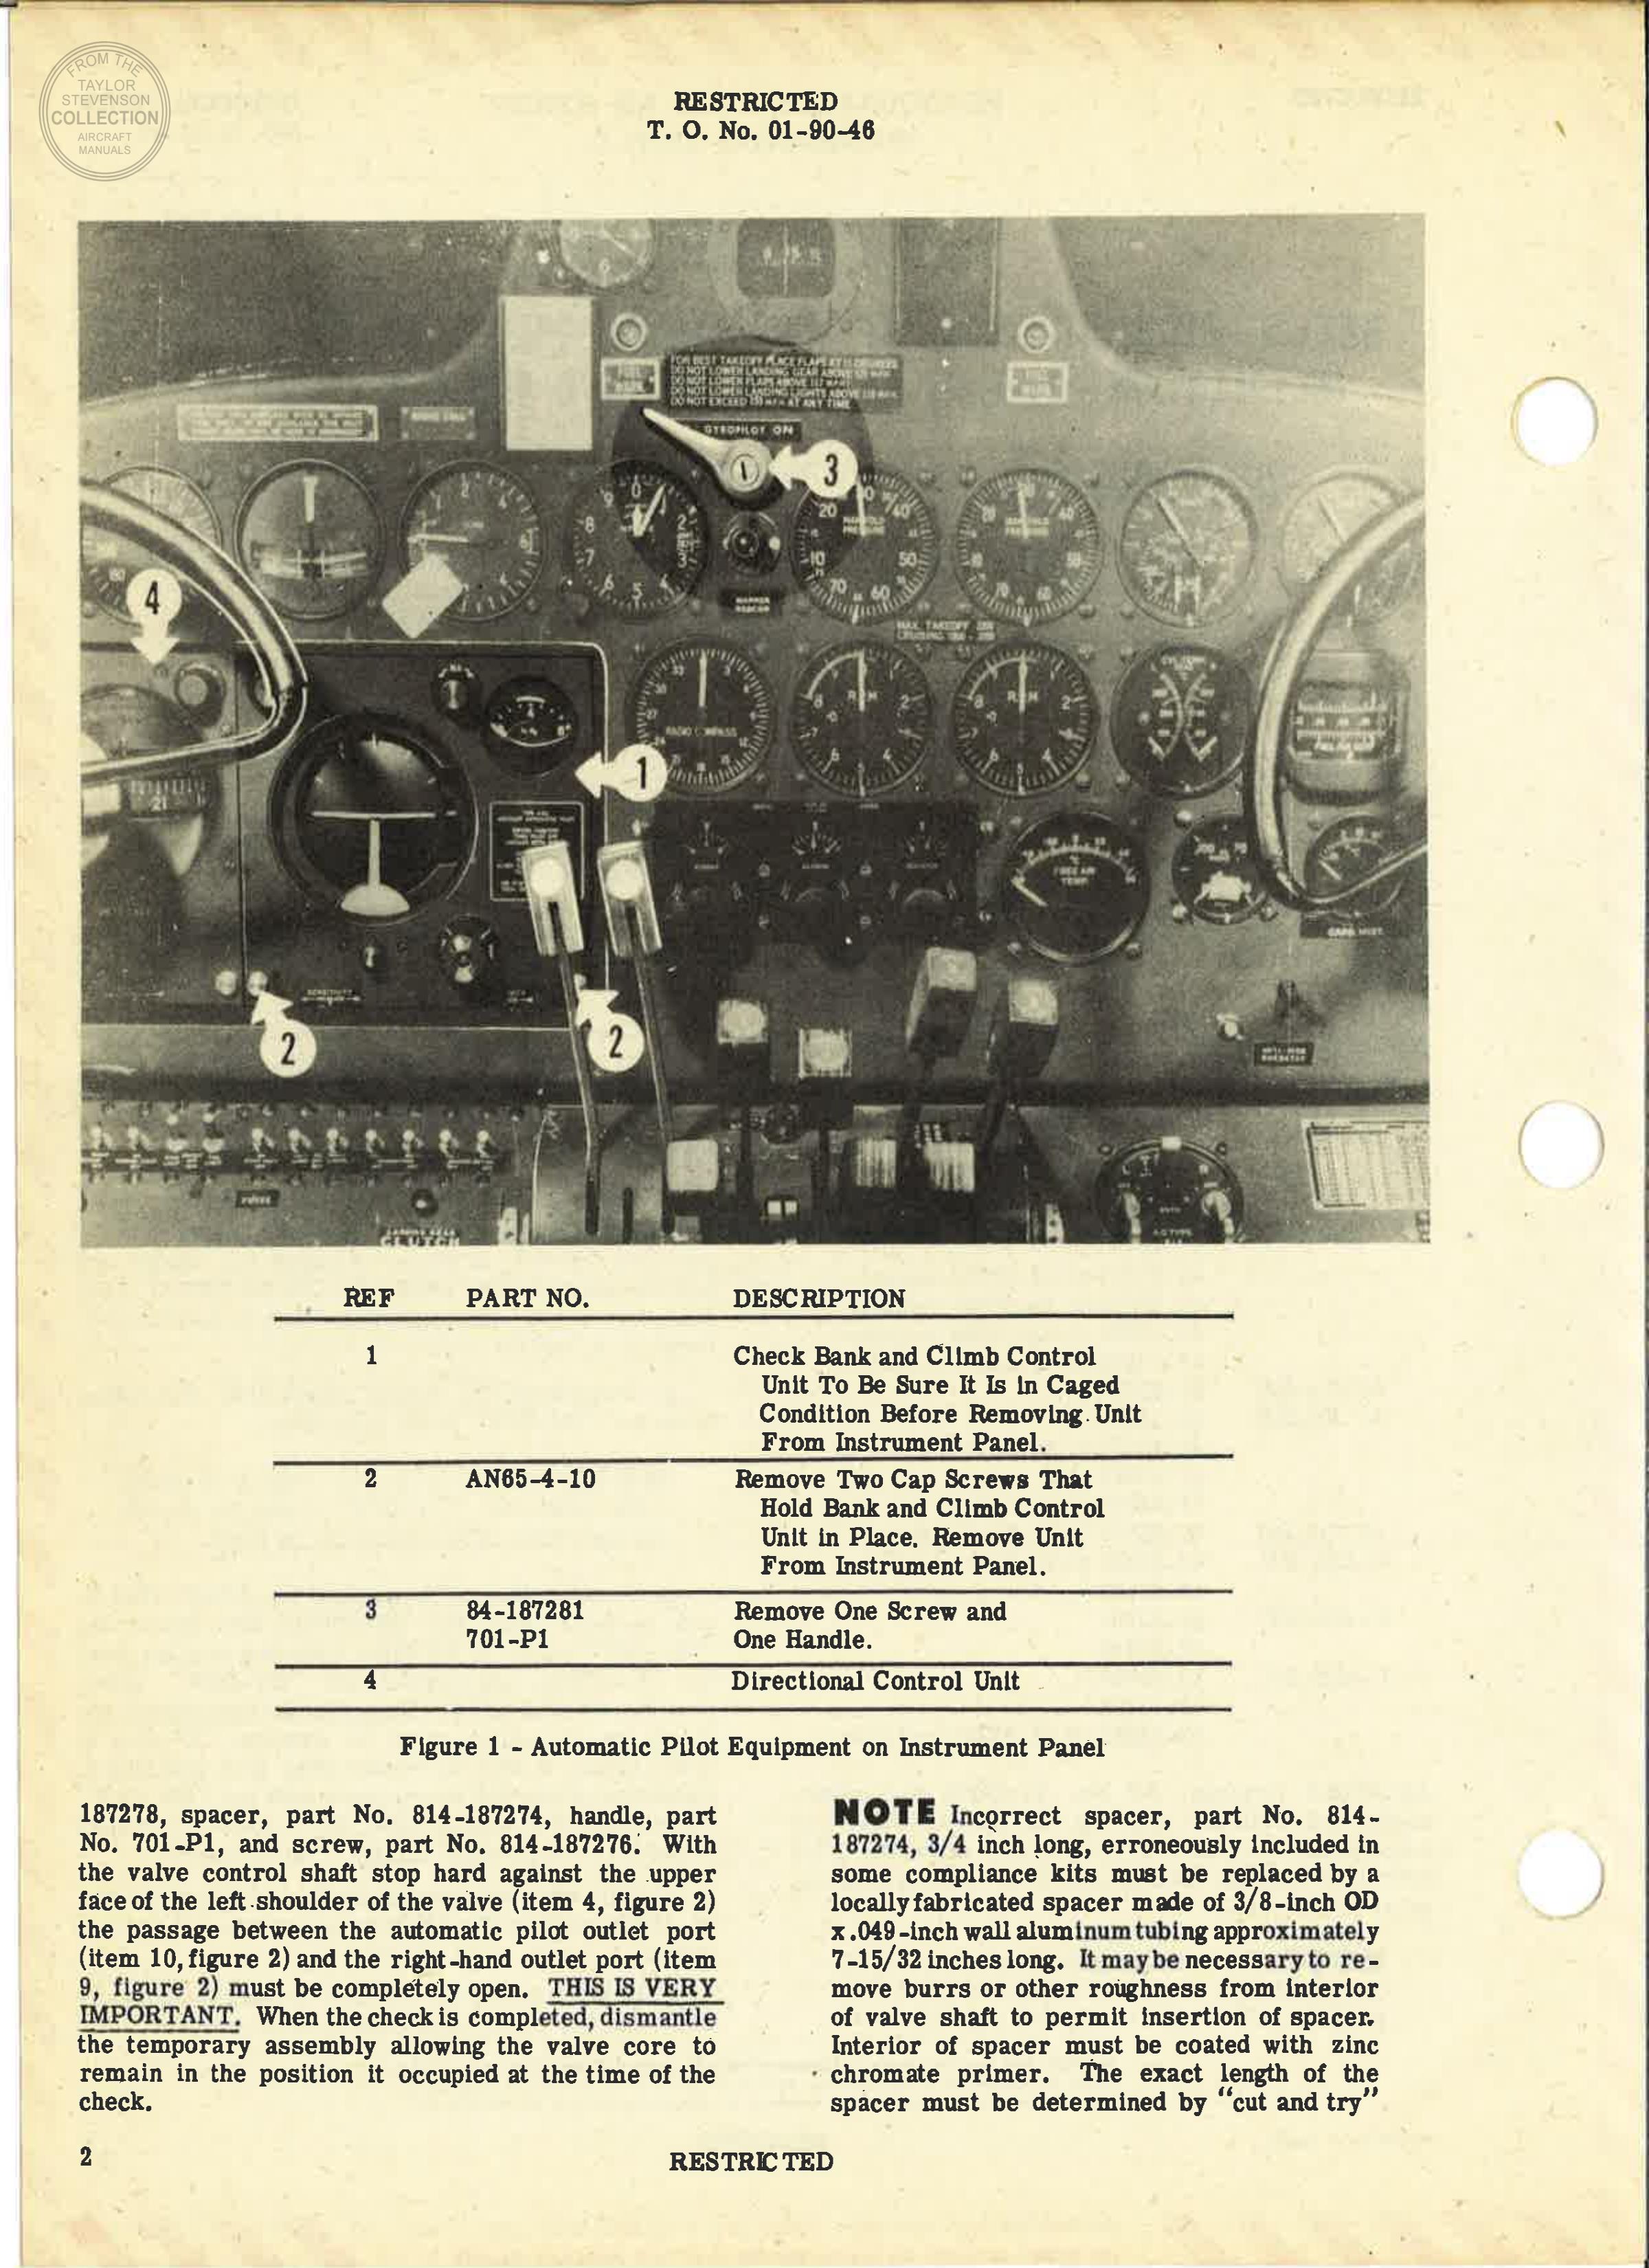 Sample page 5 from AirCorps Library document: Beech Technical Orders - 01-90-42 through 01-90C-10